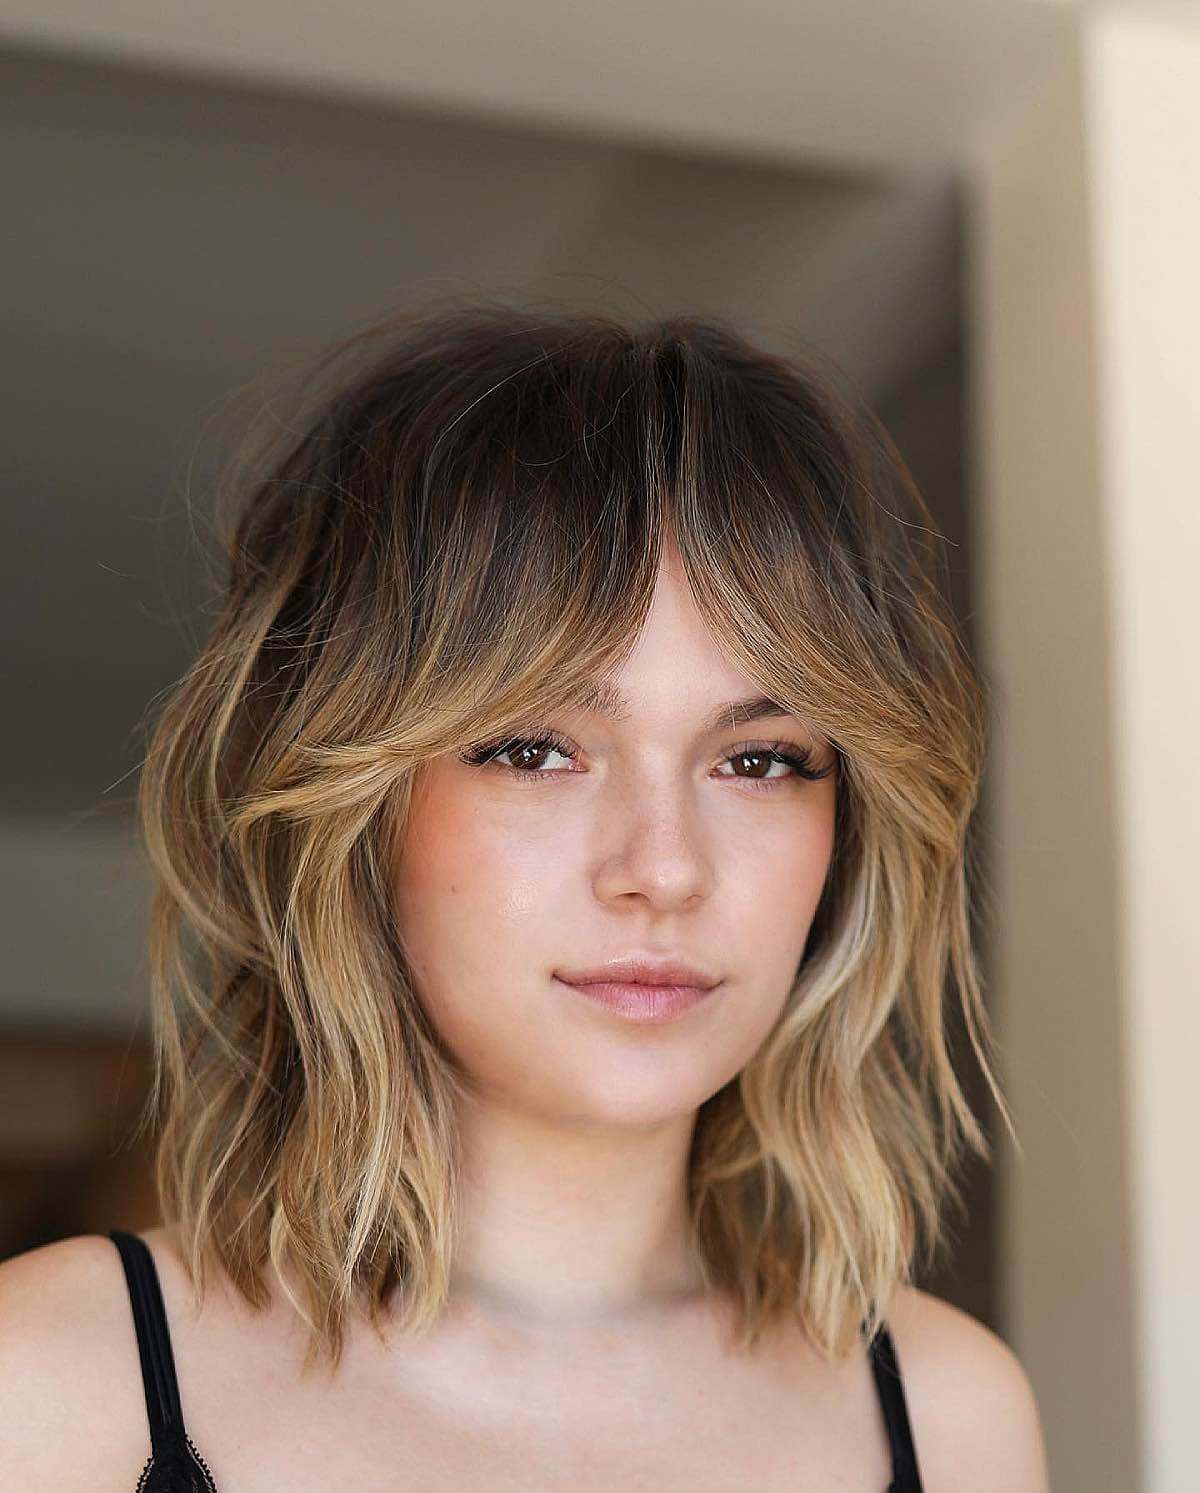 20 Best Ways to Wear Curtain Bangs with Short Hair